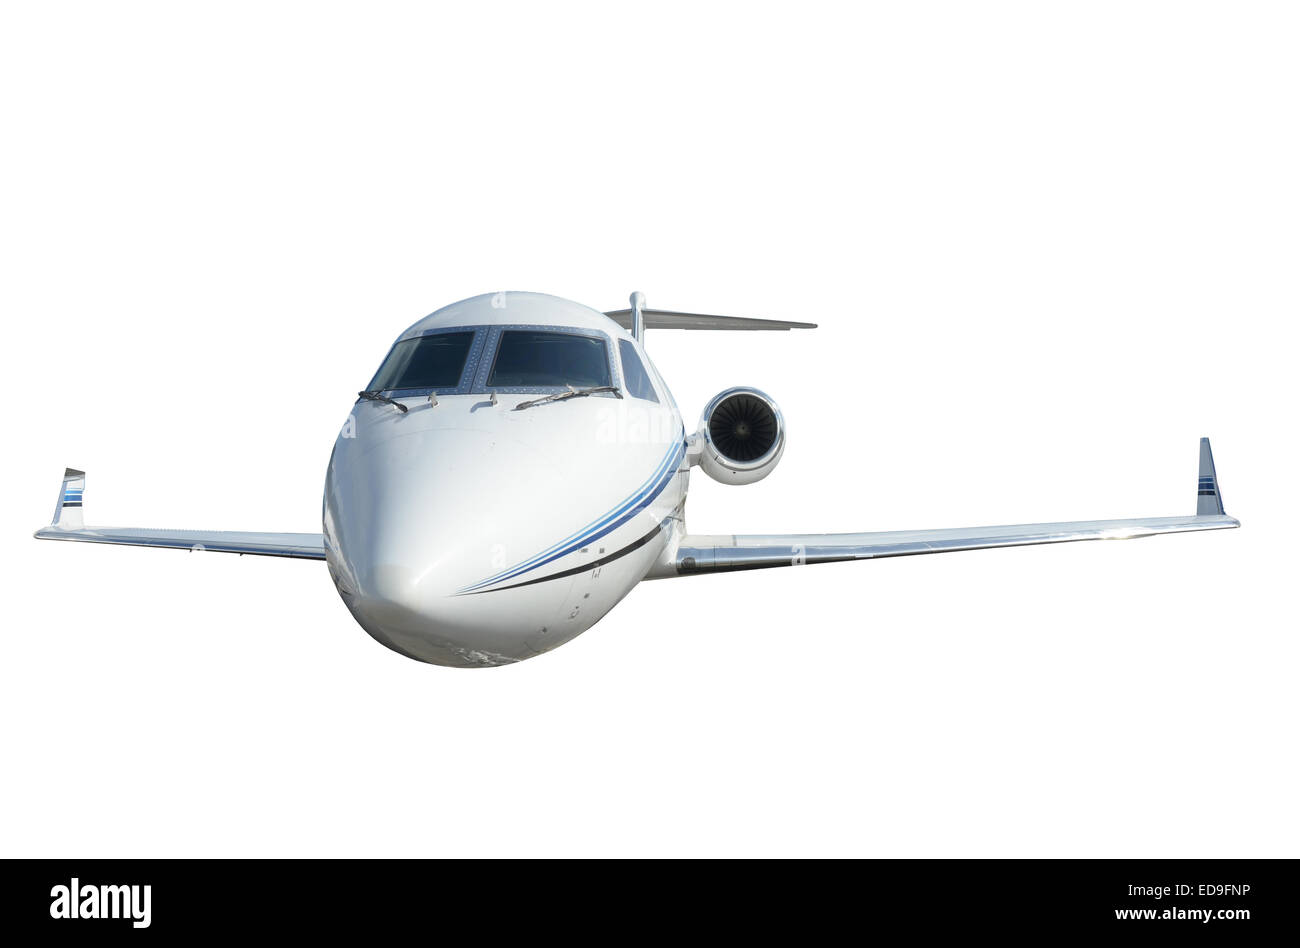 Modern corporate jet airplane isolated on white Stock Photo